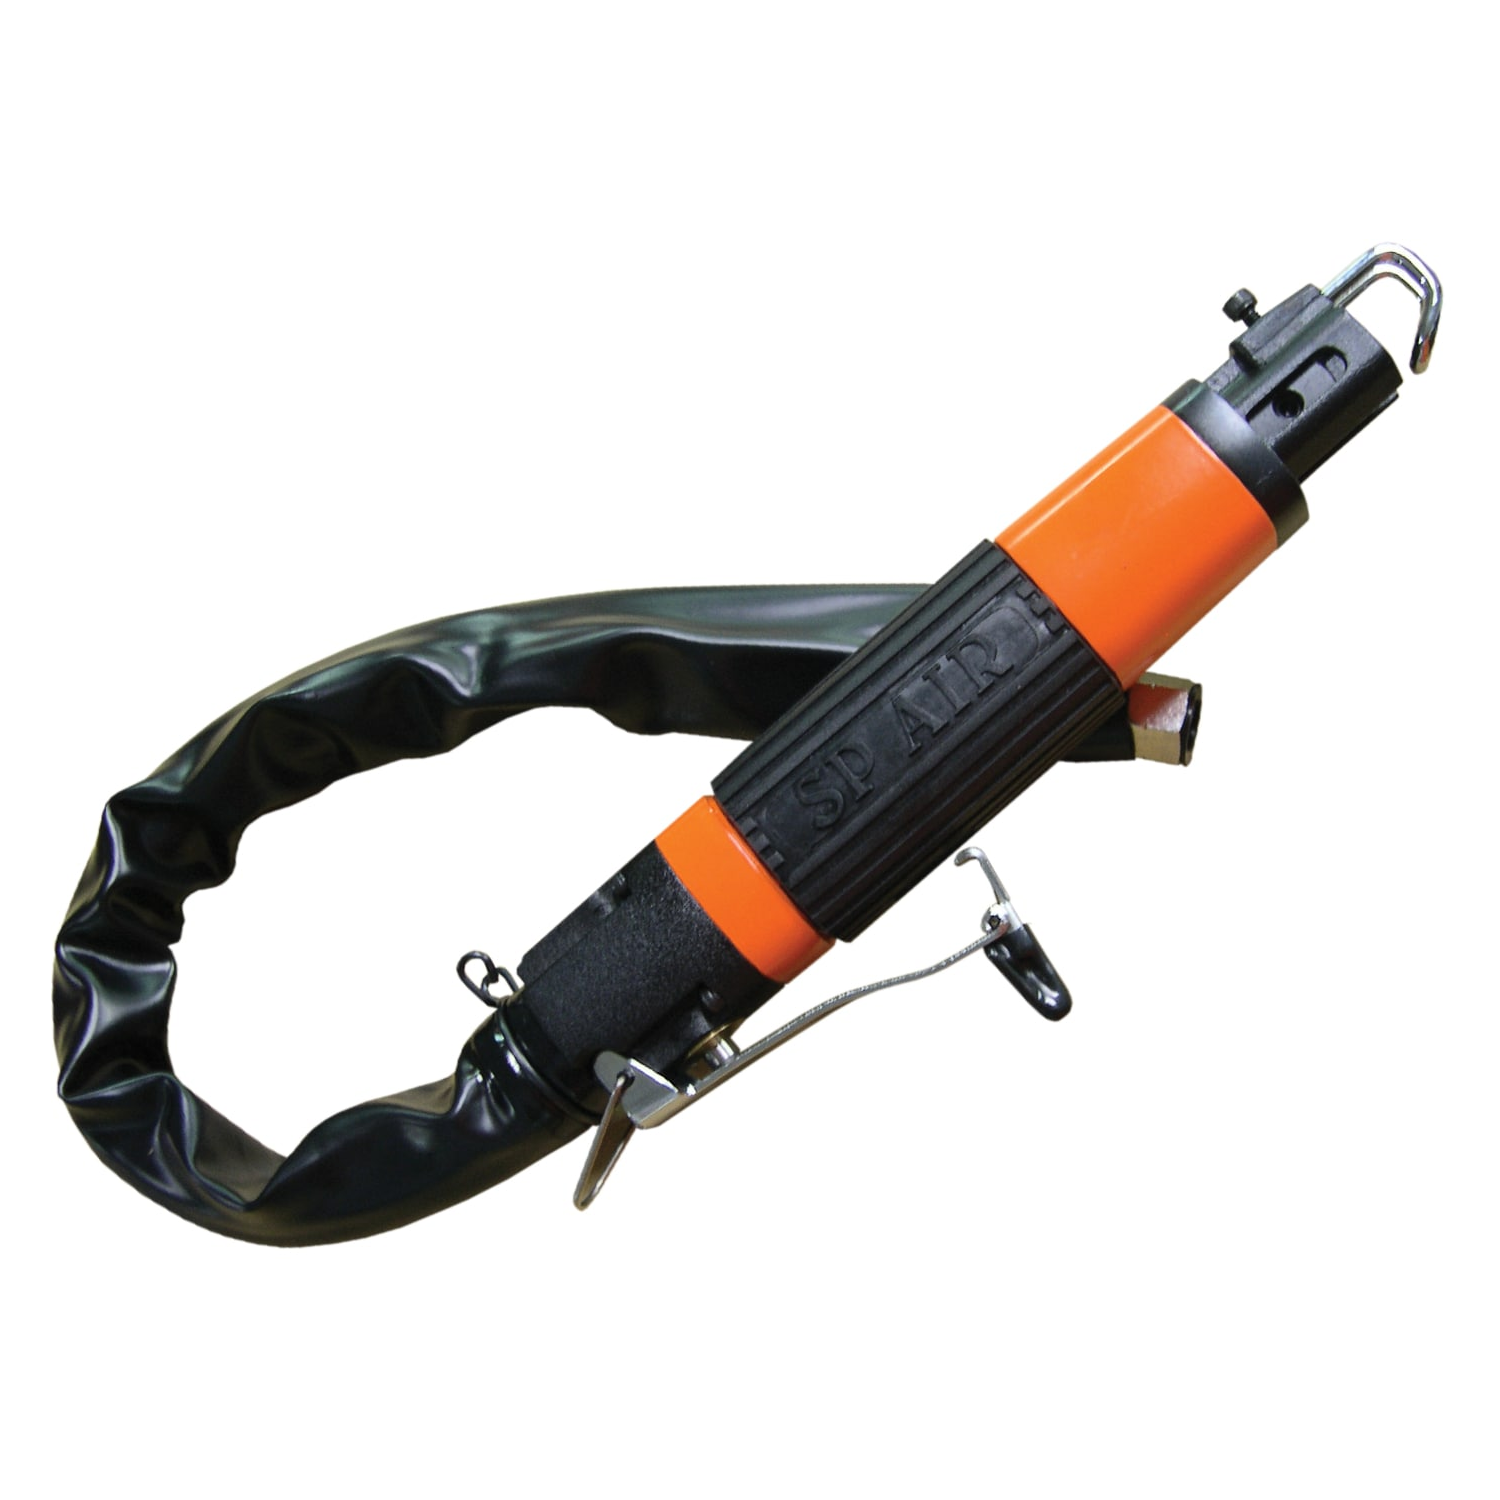 Air Saw SP-2730 by SP Tools